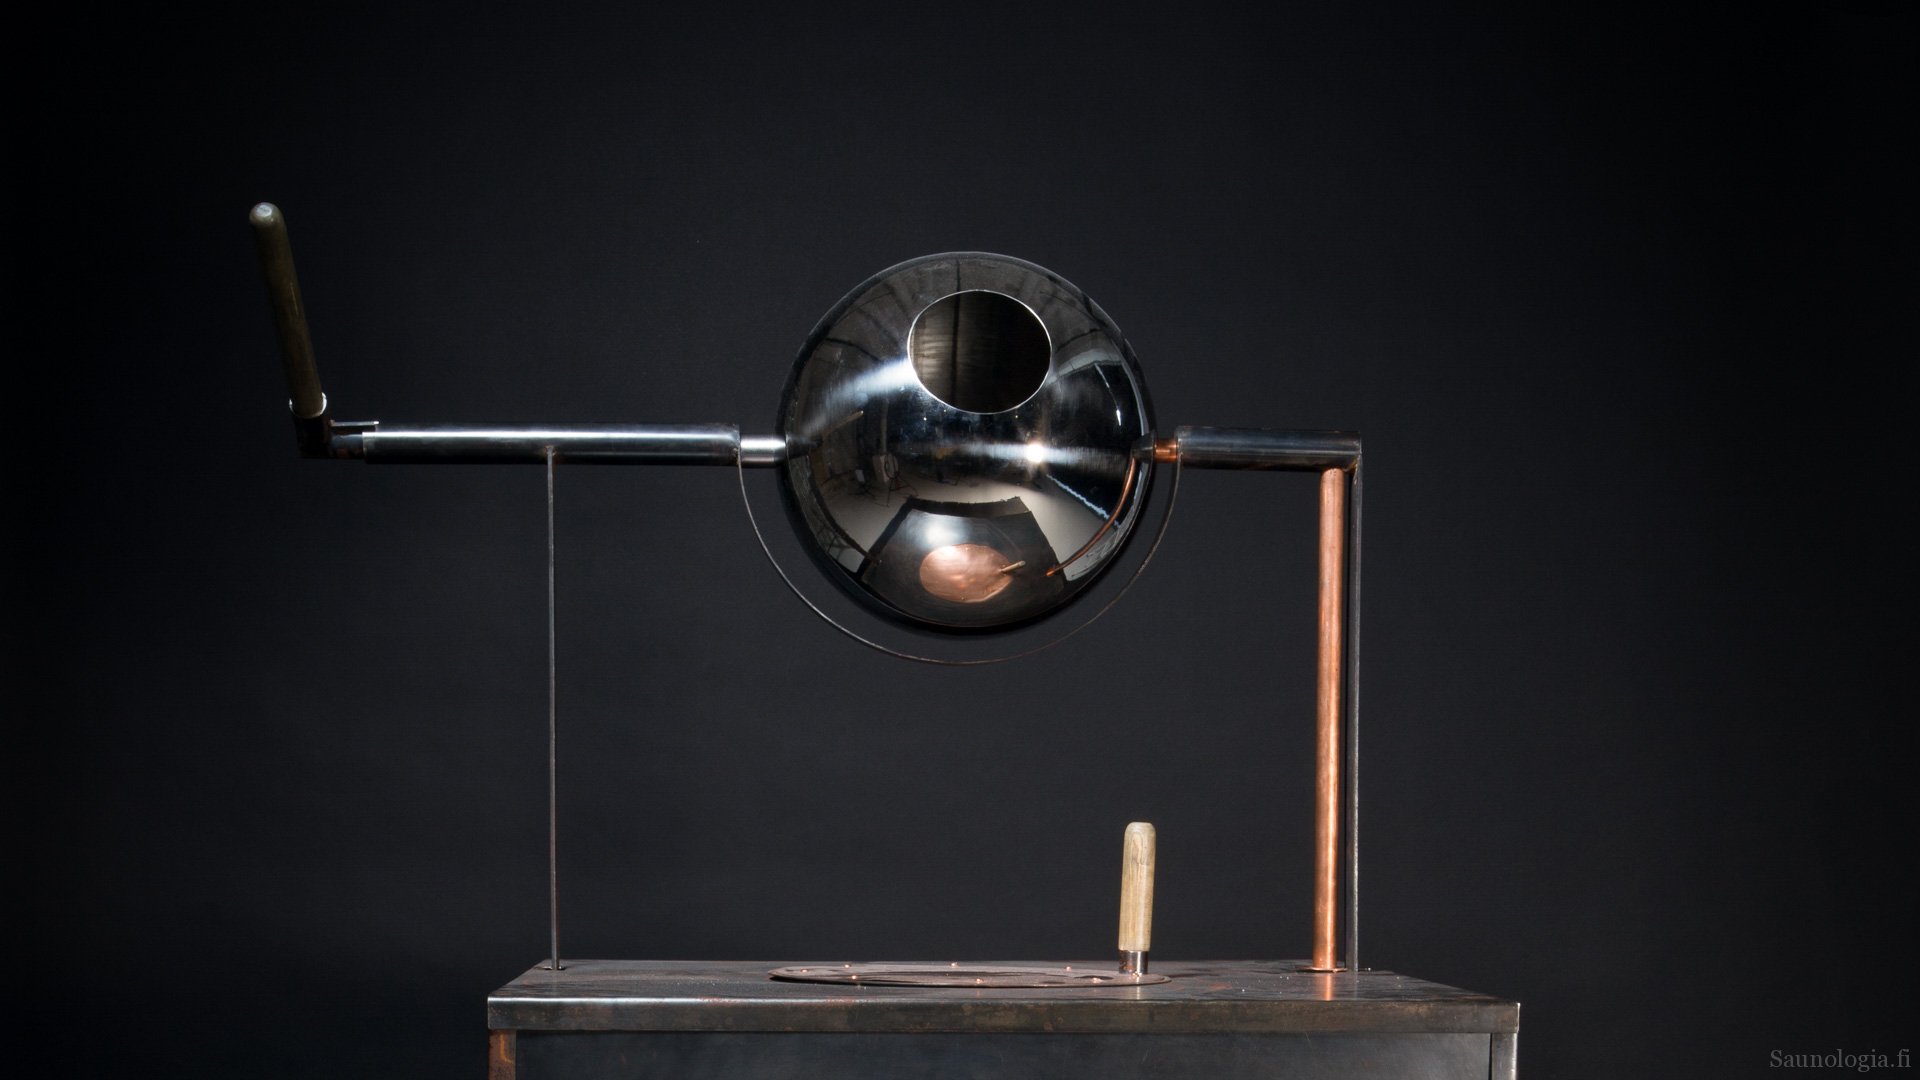 Exhibition of Designer Stoves: Forms of Steam in Finnish National Museum at HDW2017